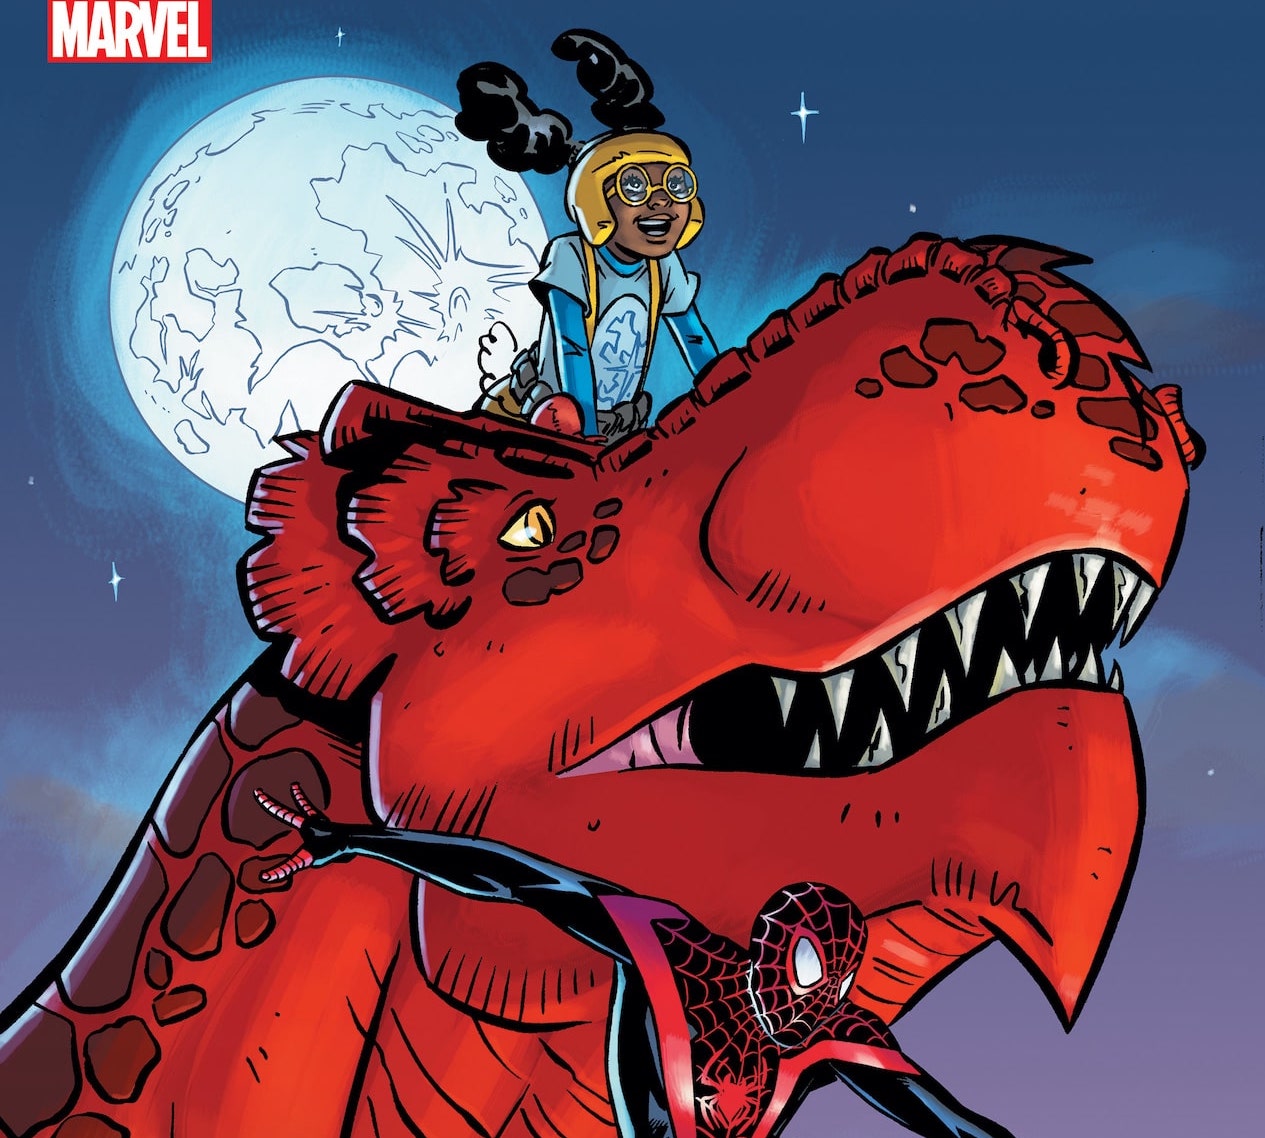 New 'Moon Girl' series teams her up with Miles Morales, X-Men, and more